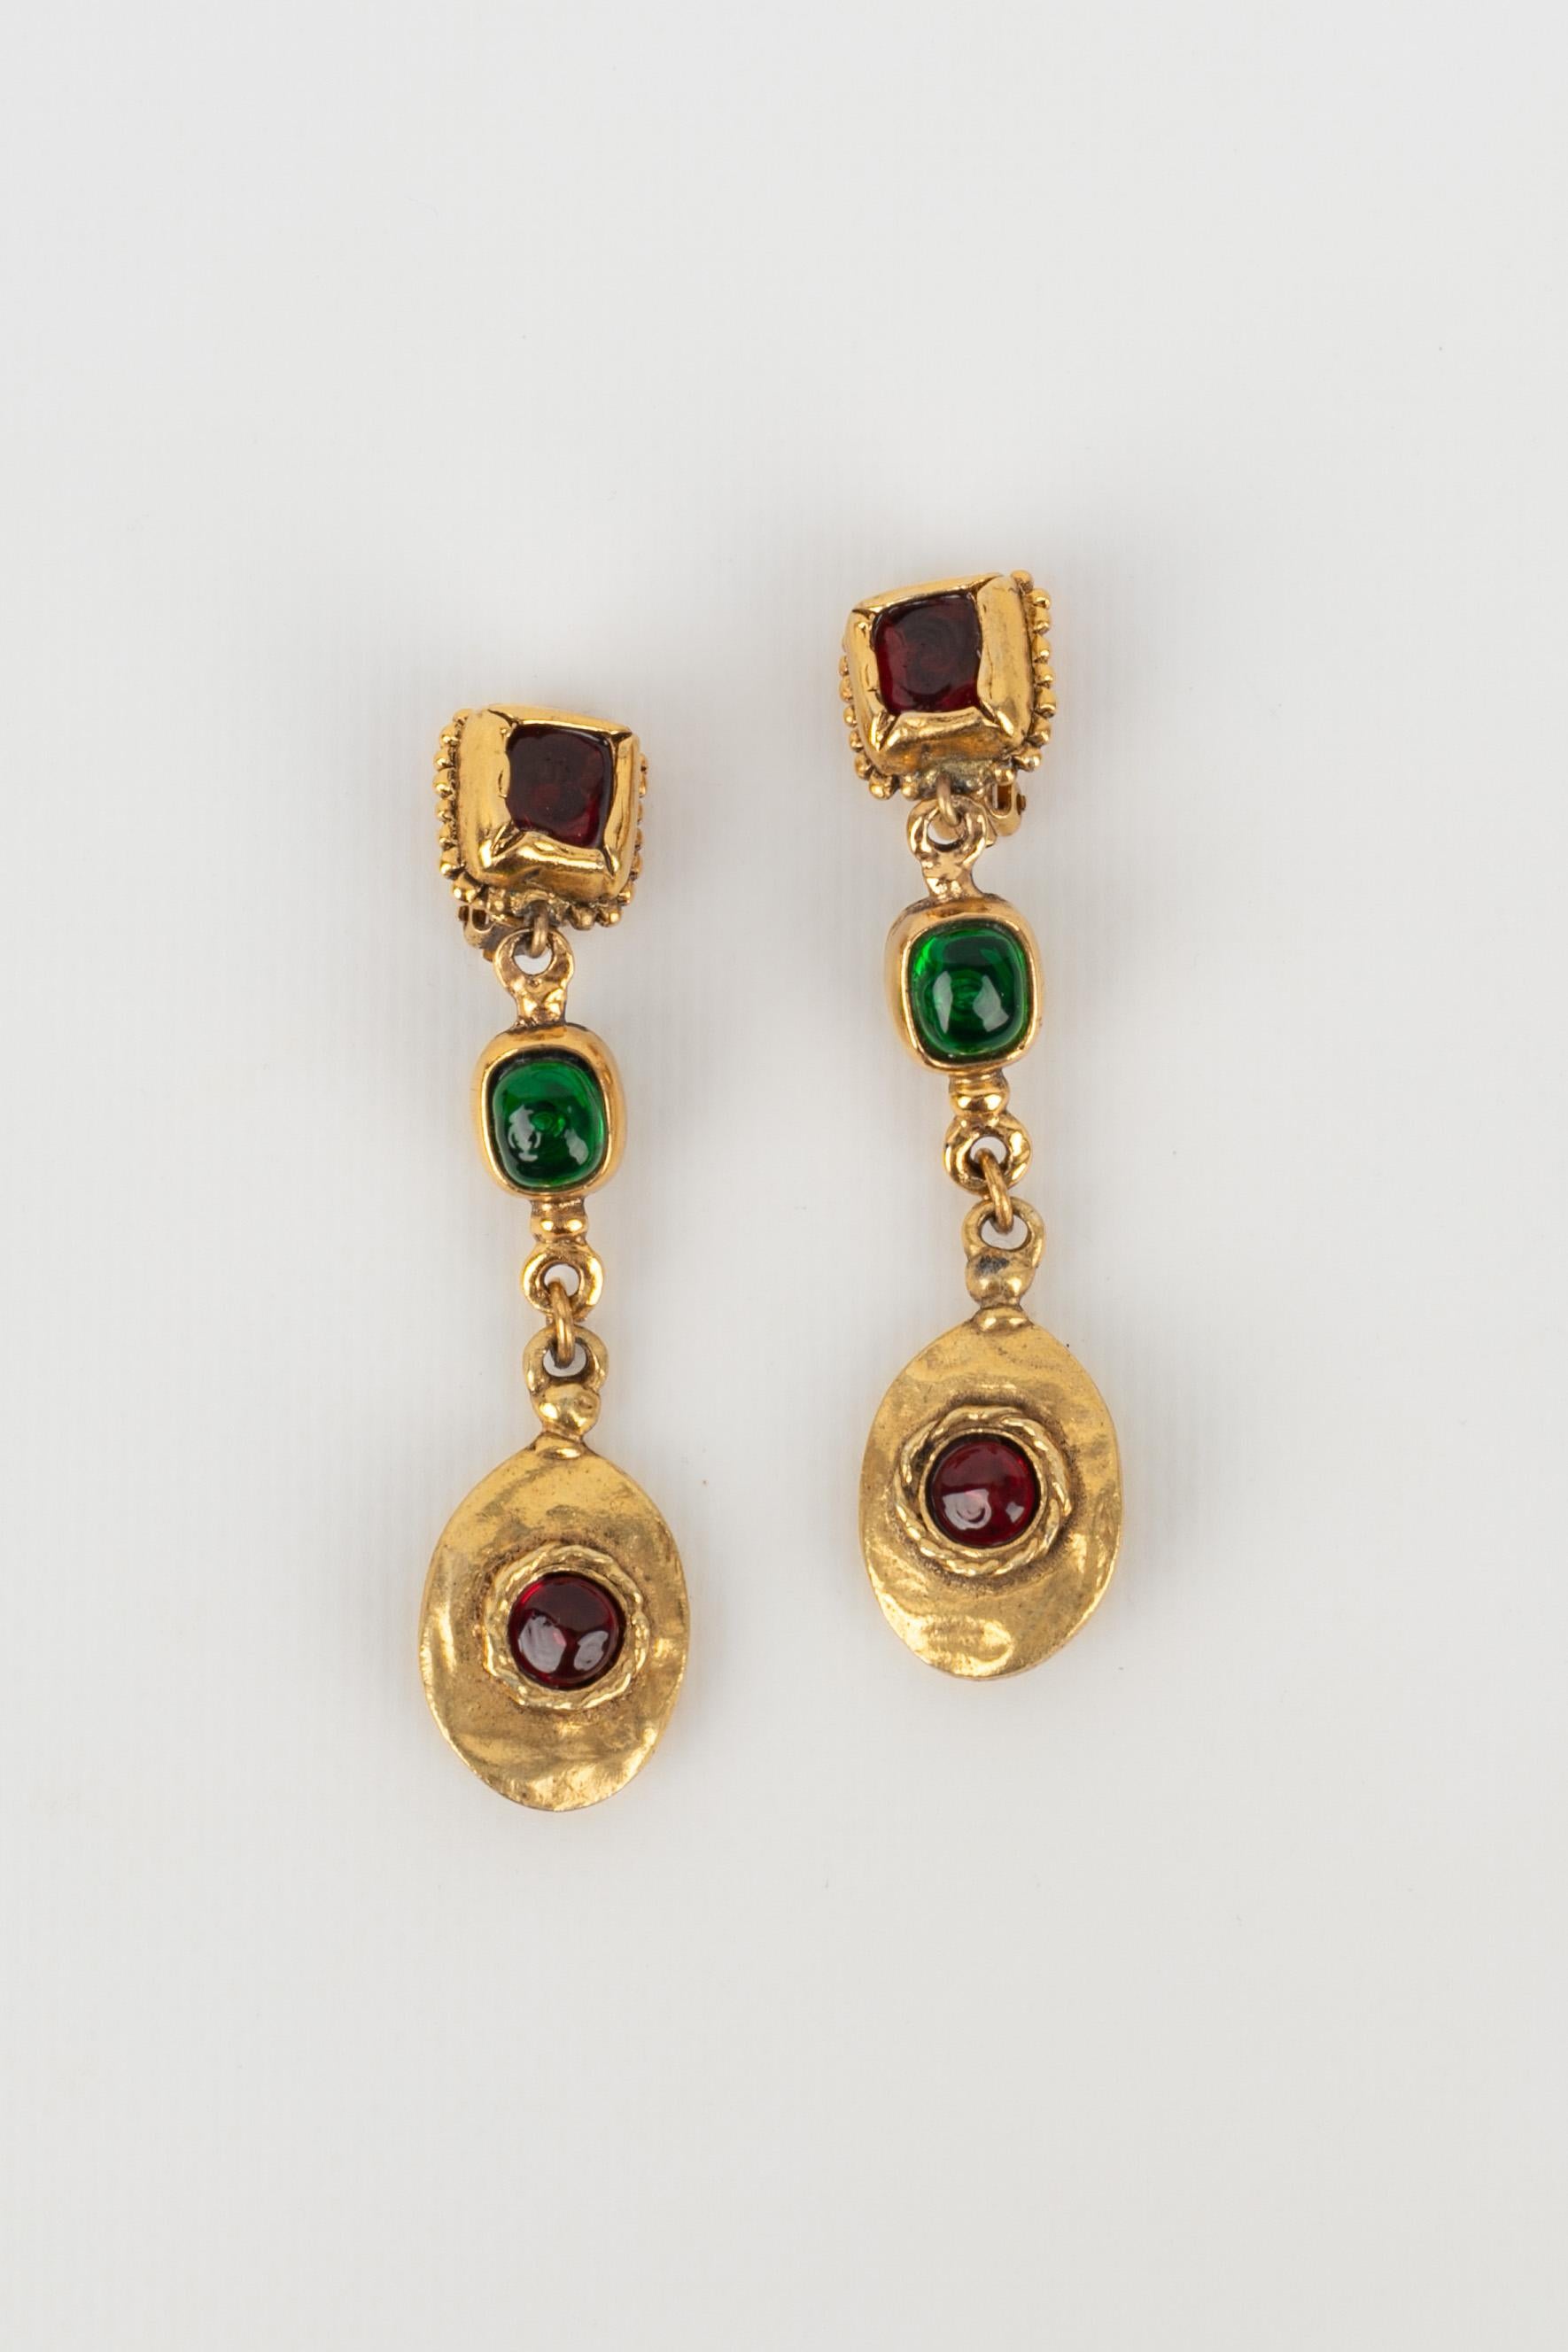 CHANEL - (Made in France) Golden metal earrings with glass paste. Jewelry from the 1980s.

Condition:
Very good condition

Dimensions:
Length: 7.5 cm

BOB146